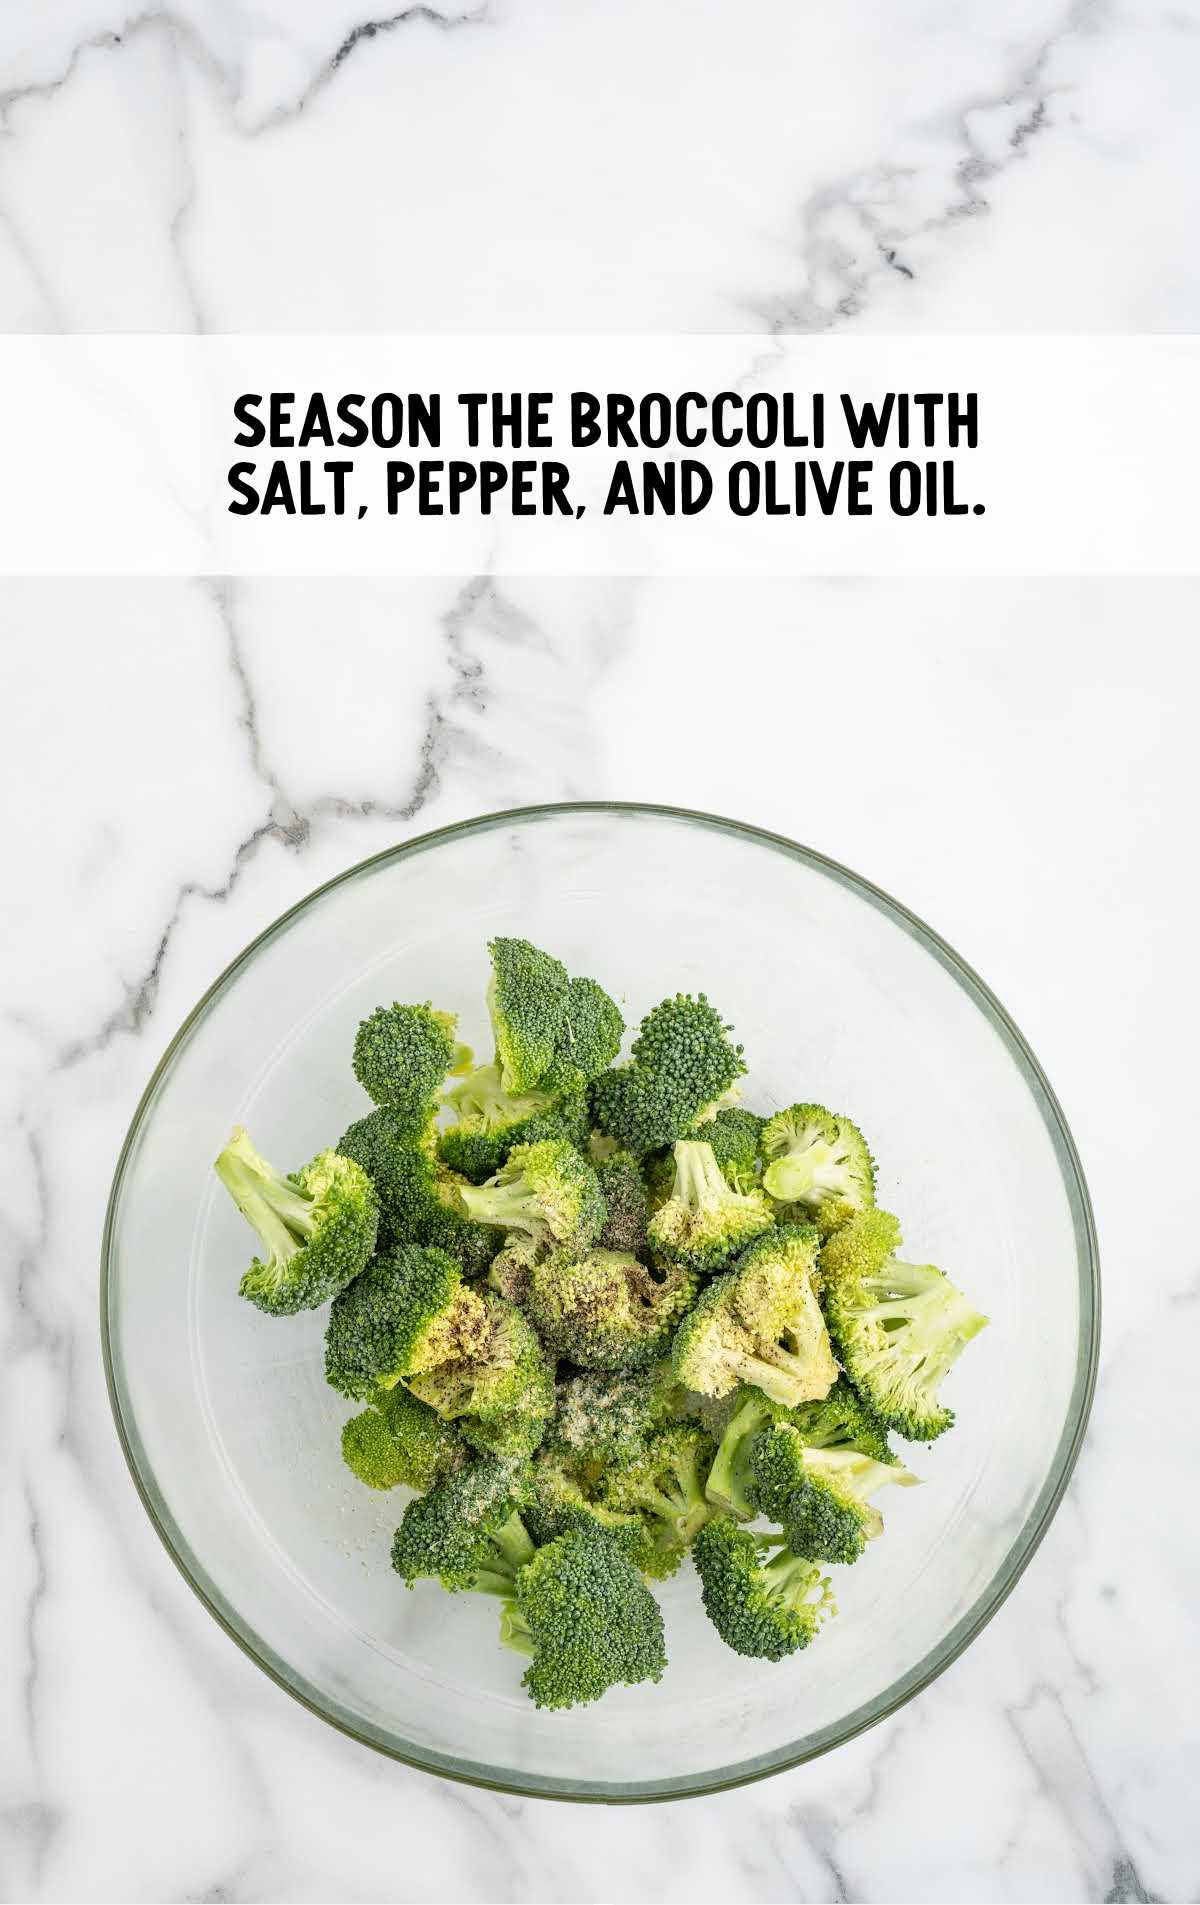 Broccoli seasoned with salt, pepper and olive oil